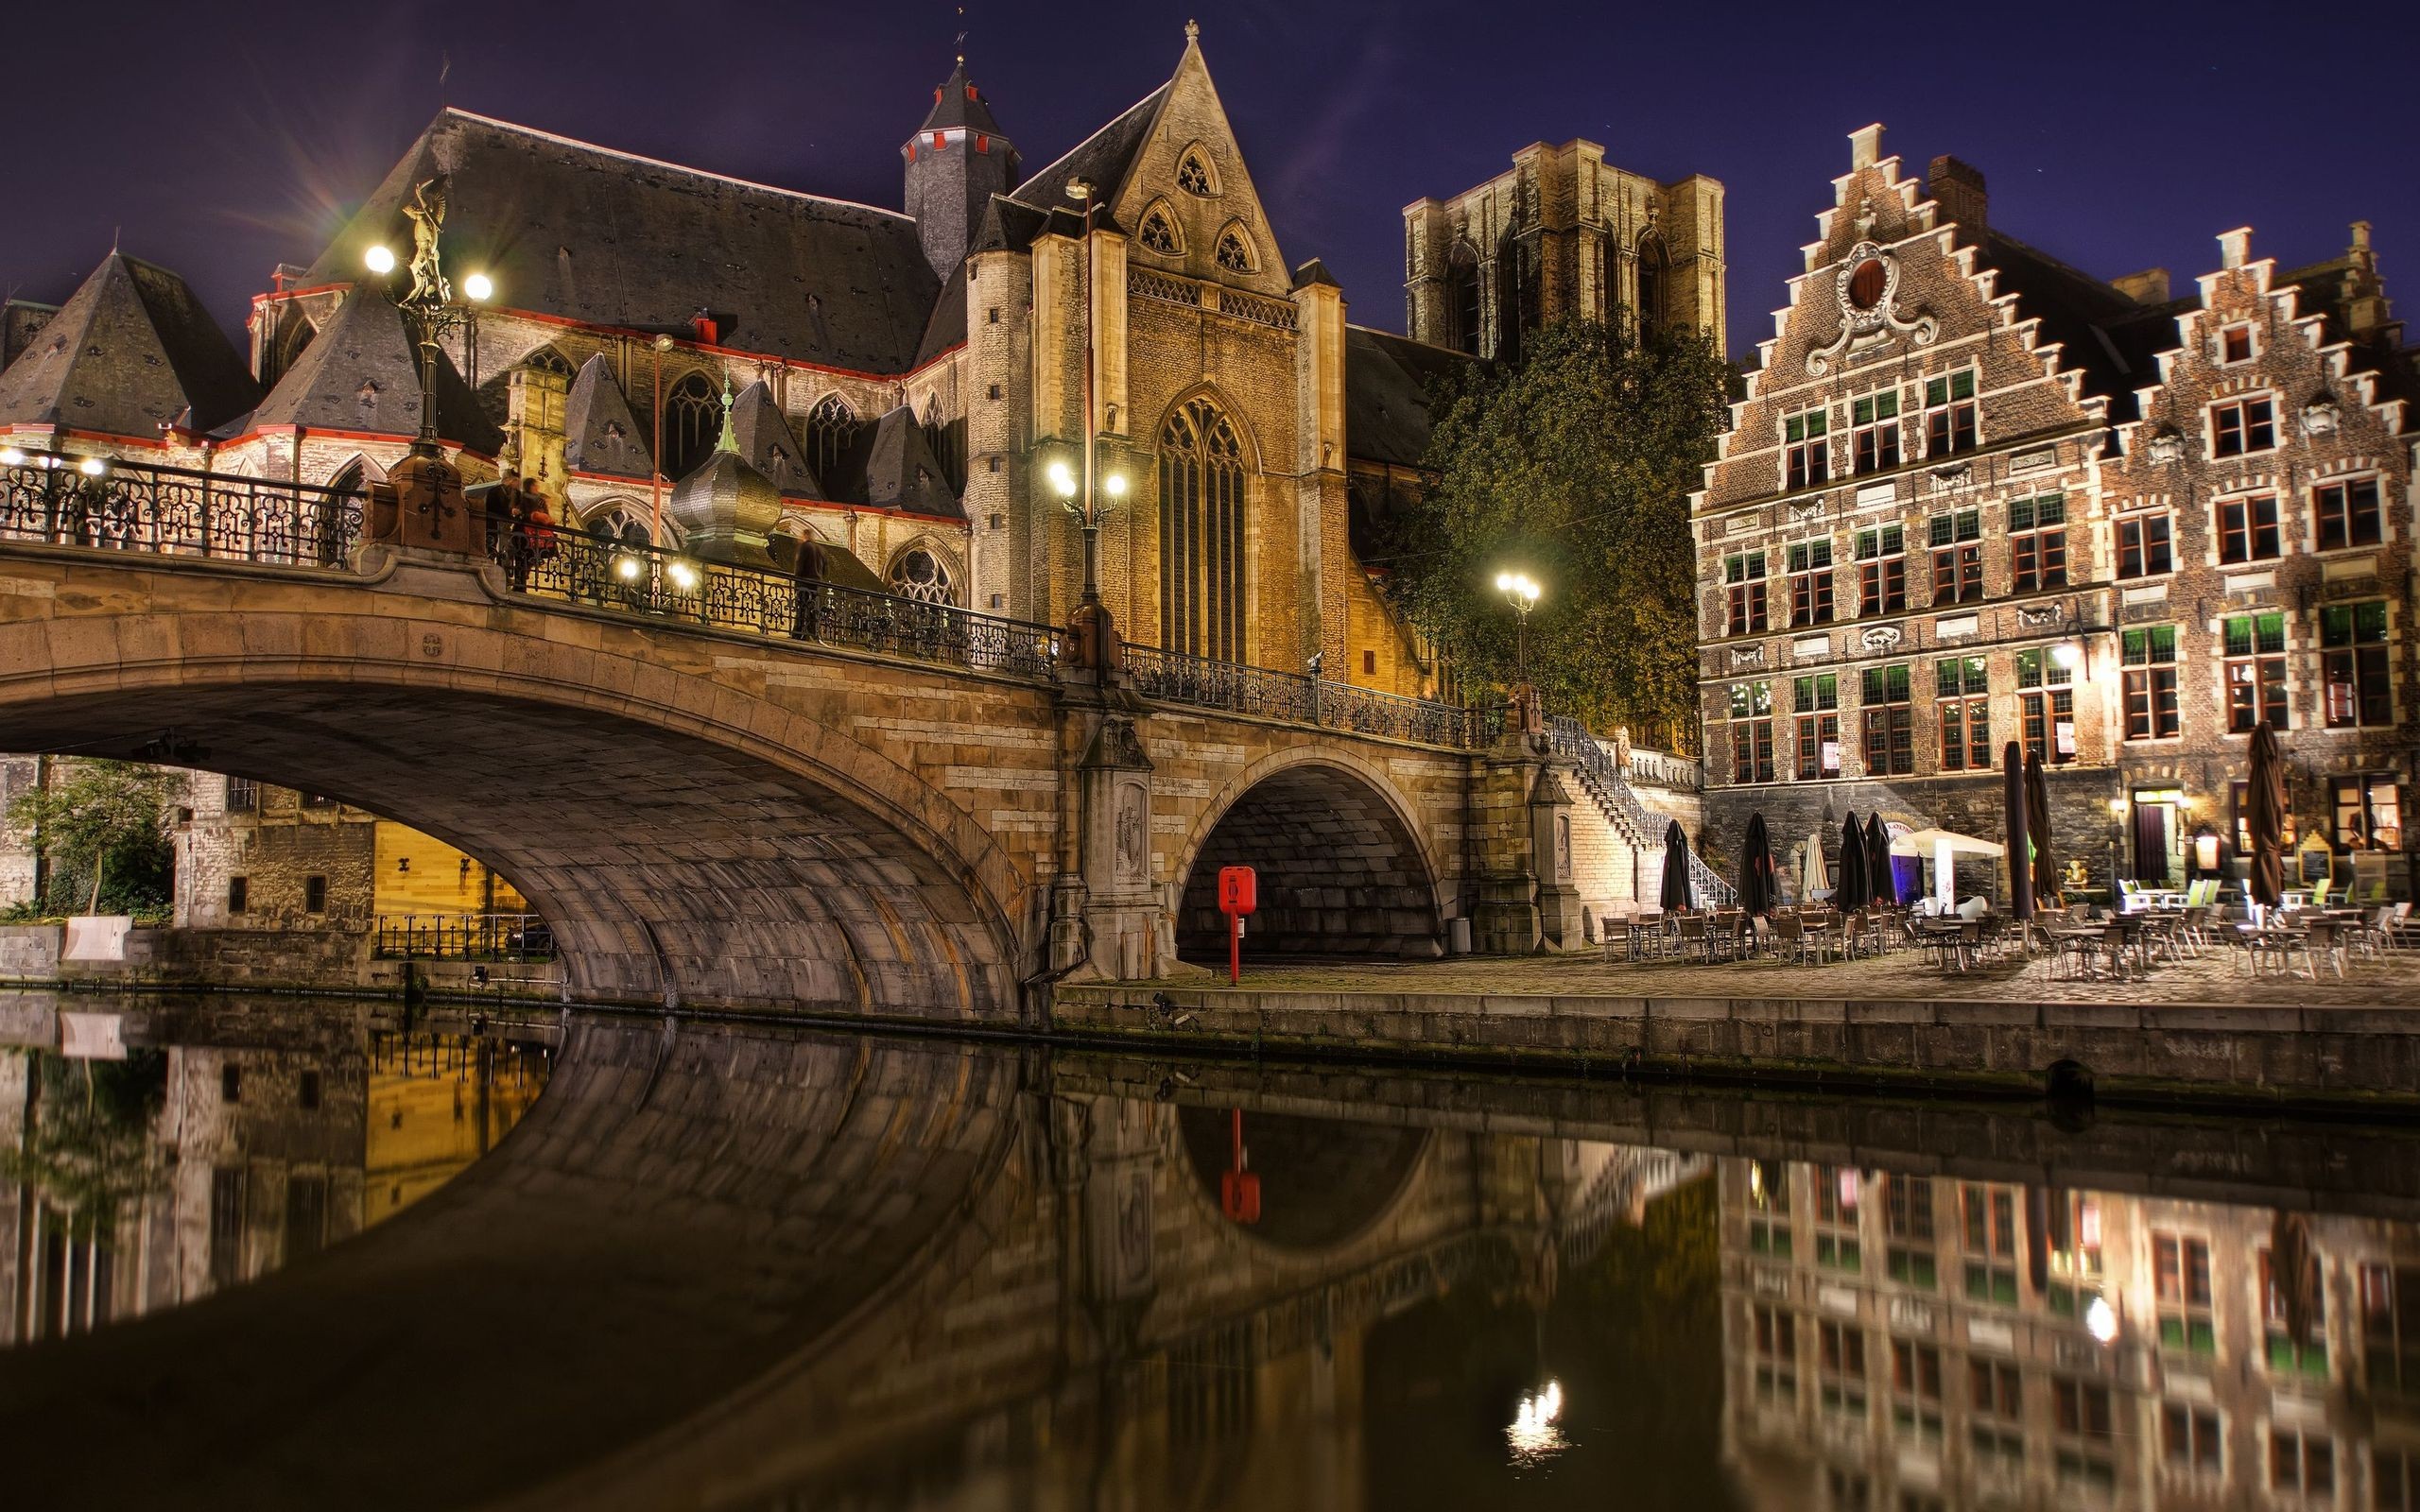 General 2560x1600 cityscape river reflection night street light Belgium Gent old building